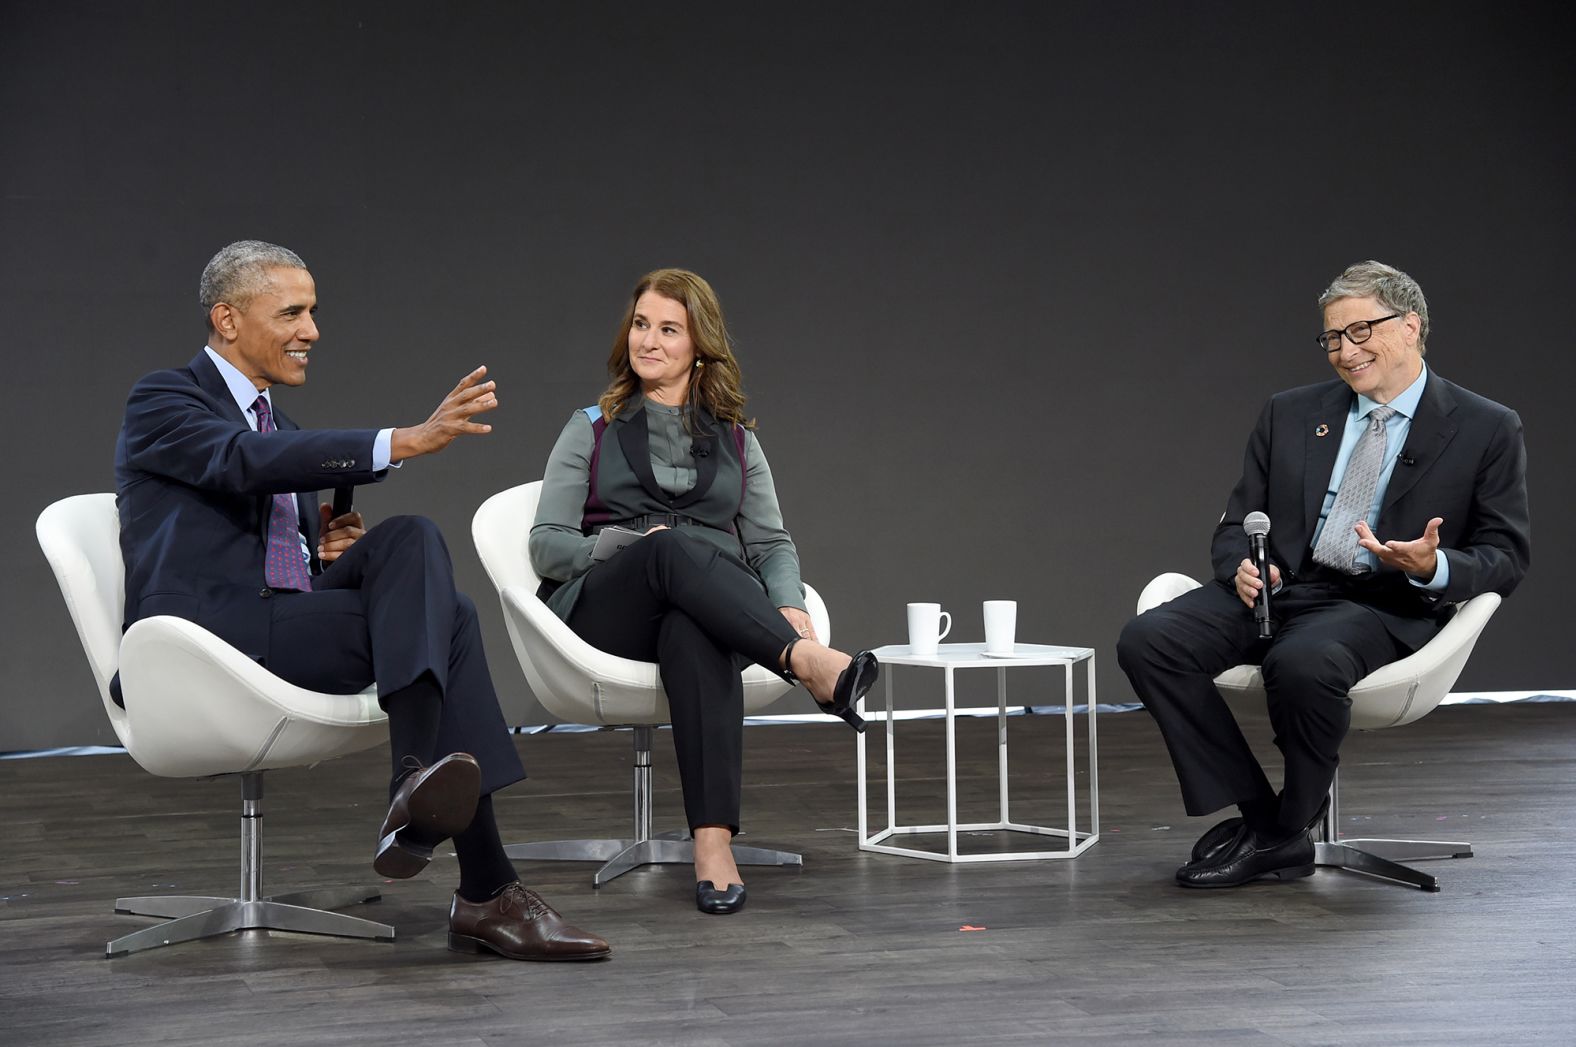 The Gateses speak at an event in New York with US President Barack Obama in 2017.